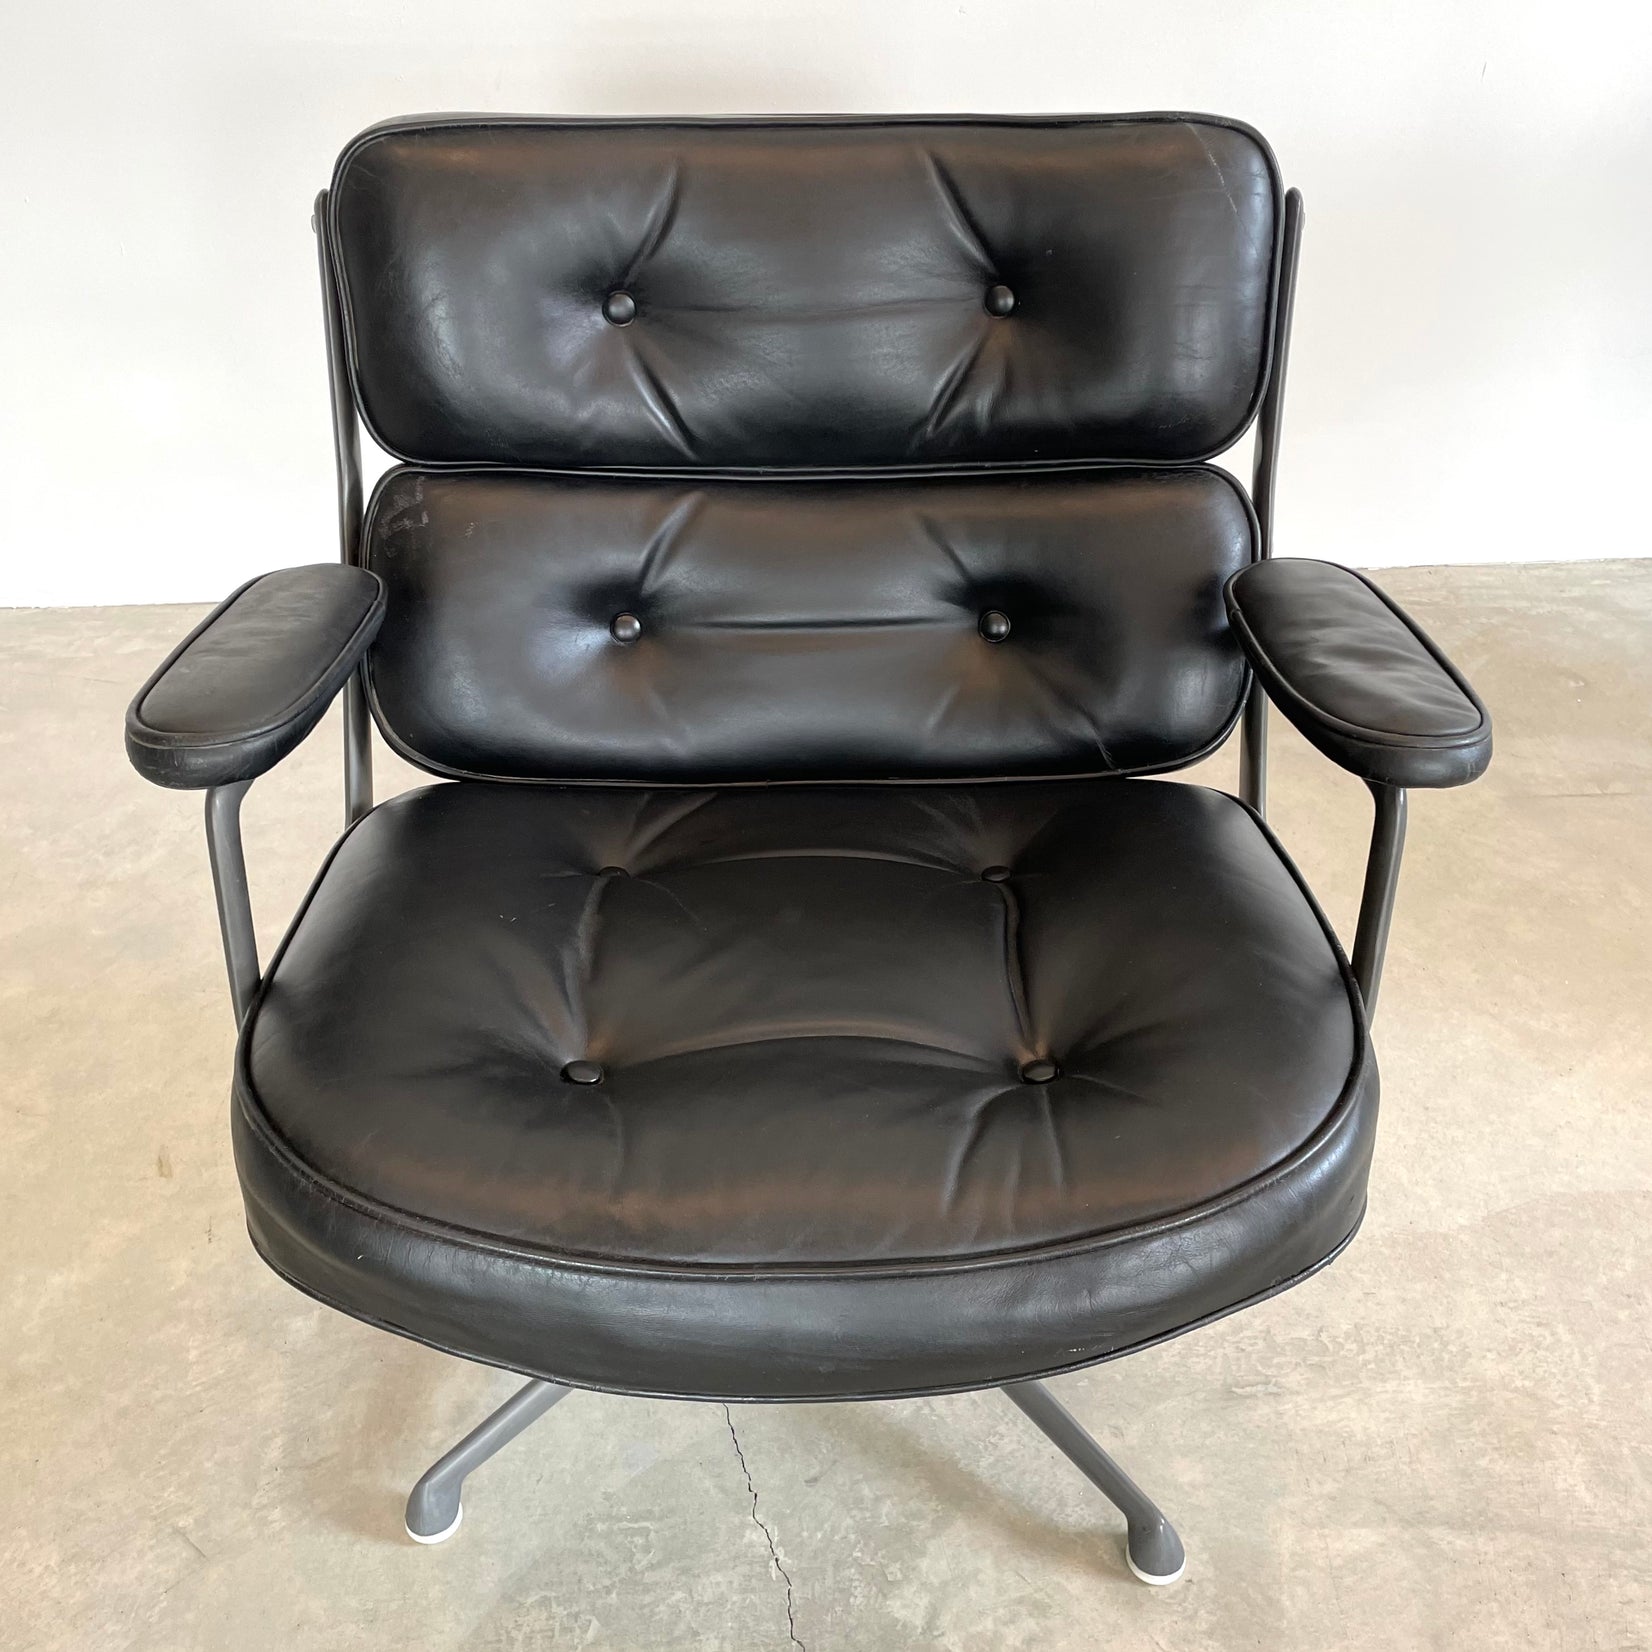 Eames Time Life Lobby Lounge Chair in Black Leather for Herman Miller, 1980s USA